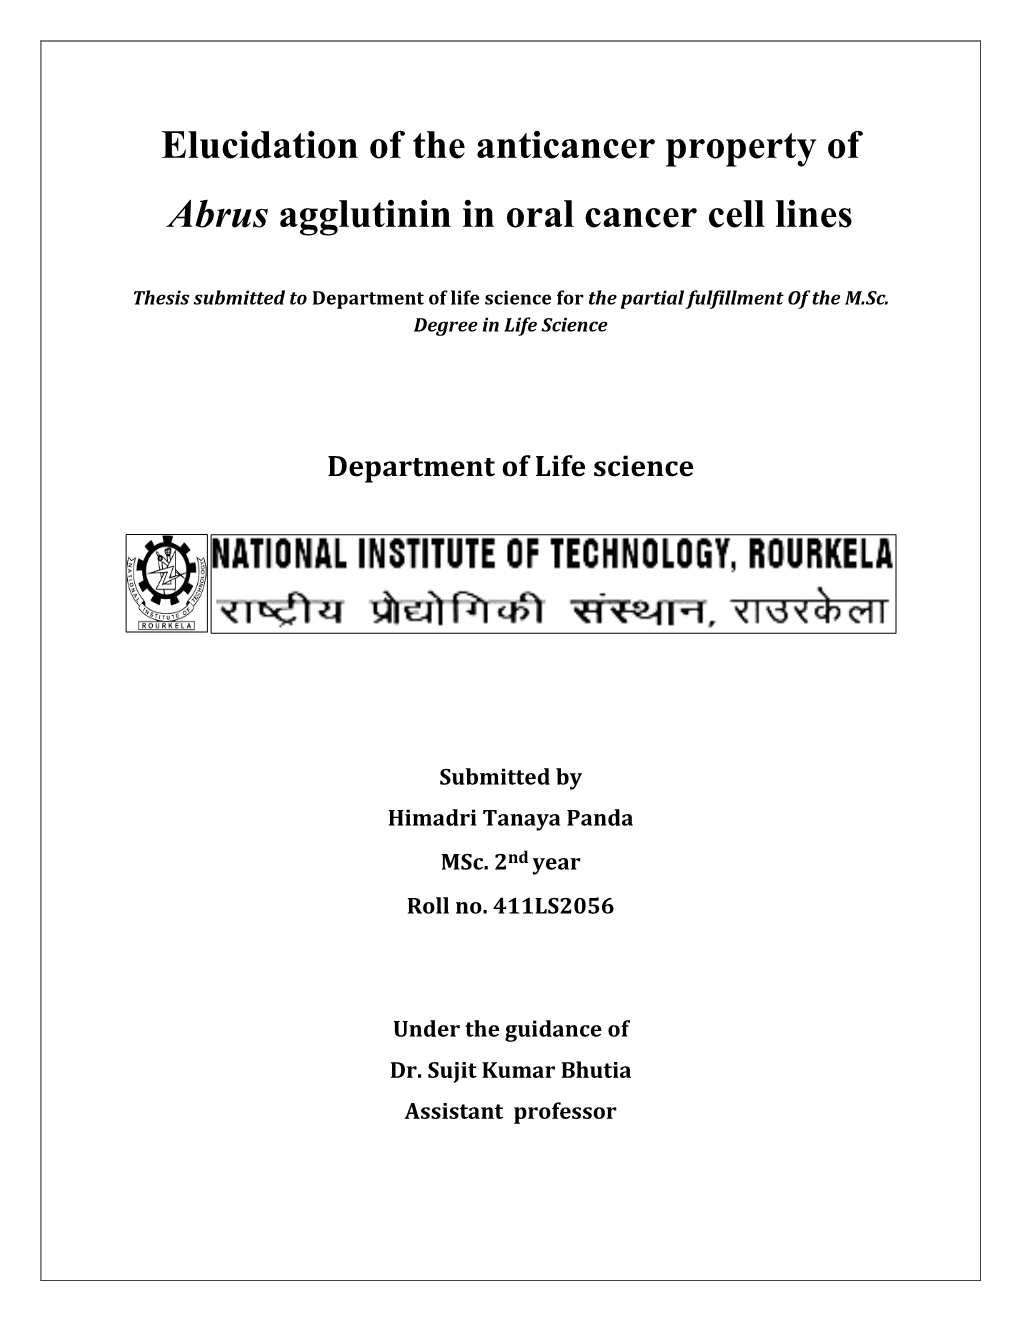 Elucidation of the Anticancer Property of Abrus Agglutinin in Oral Cancer Cell Lines